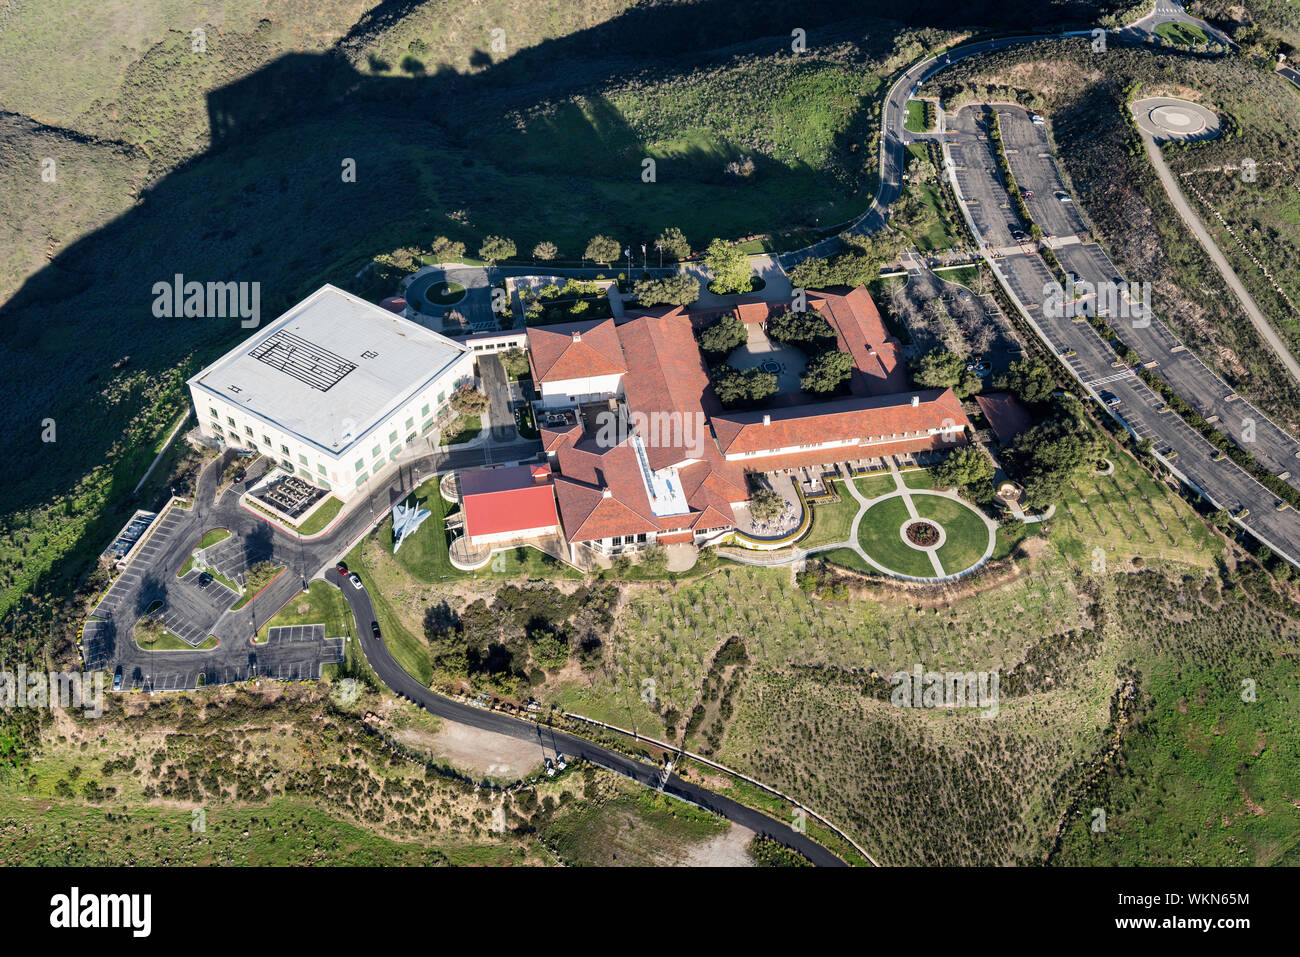 Simi Valley, California, USA - March 26, 2018:  Aerial view of Ronald Reagan Presidential Library and Center for Public Affairs near Los Angele in Ven Stock Photo